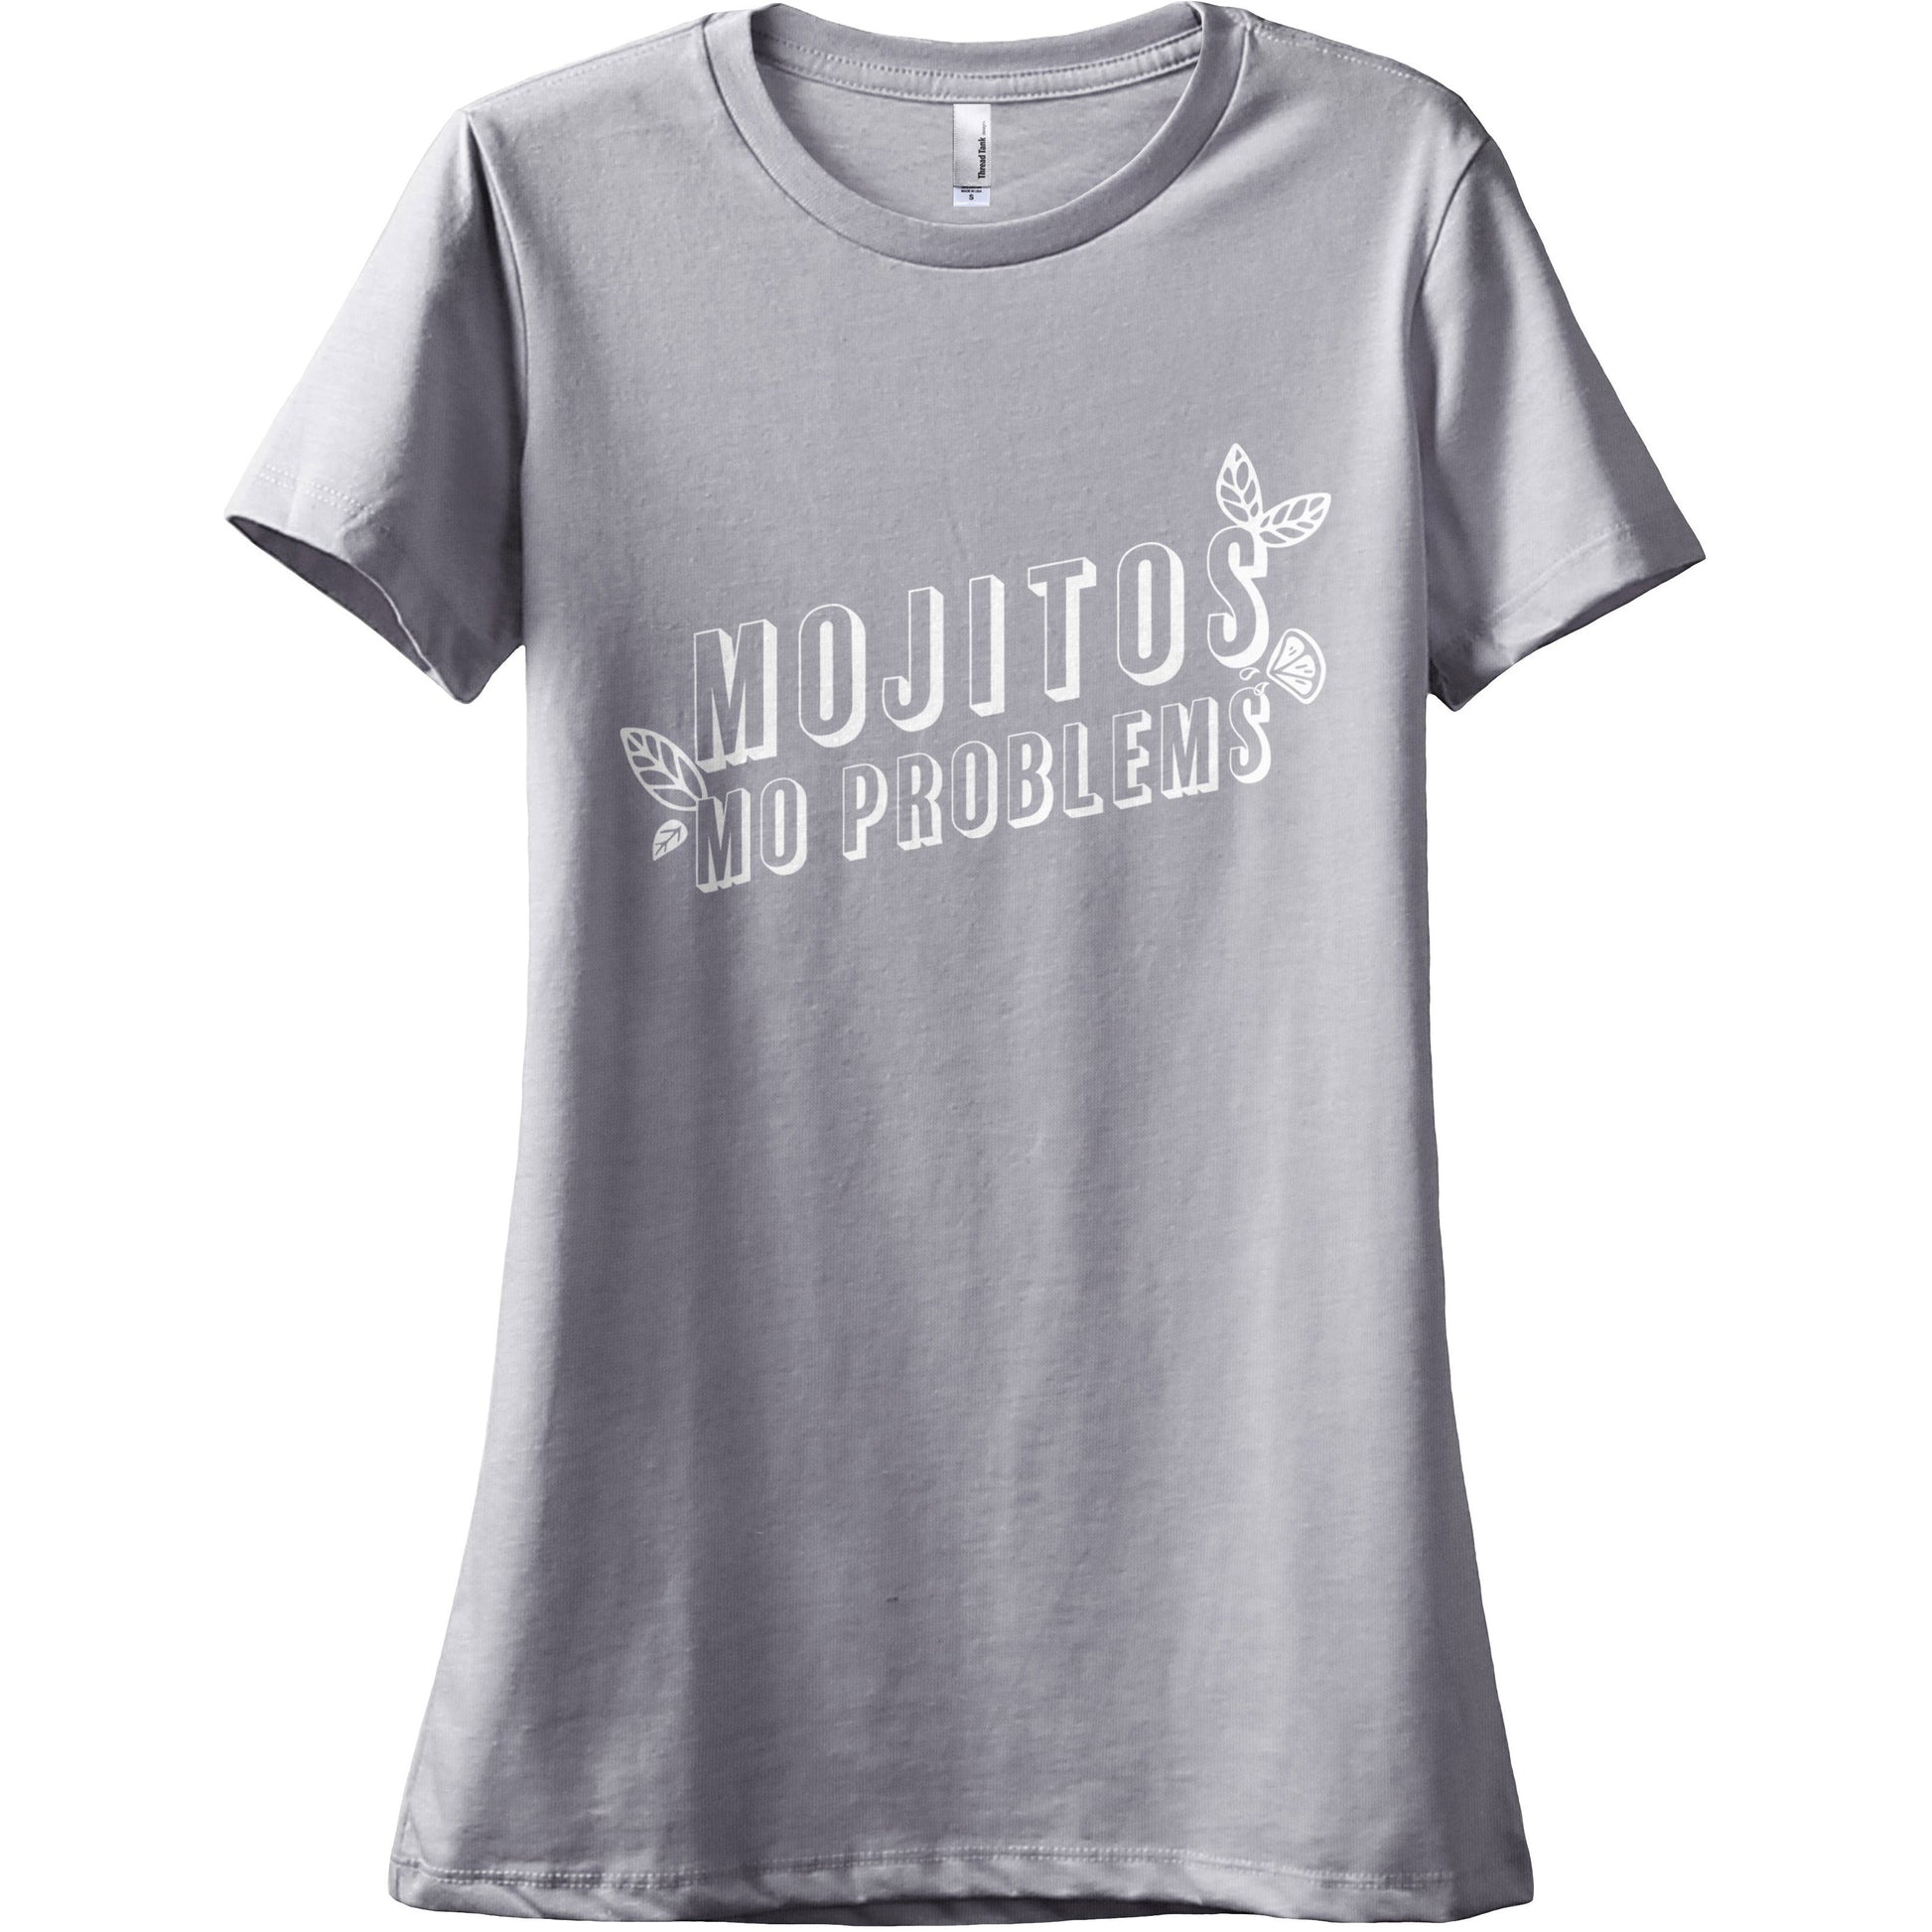 Mojitos, Mo Problems Women's Relaxed Crewneck T-Shirt Top Tee Heather Lilac